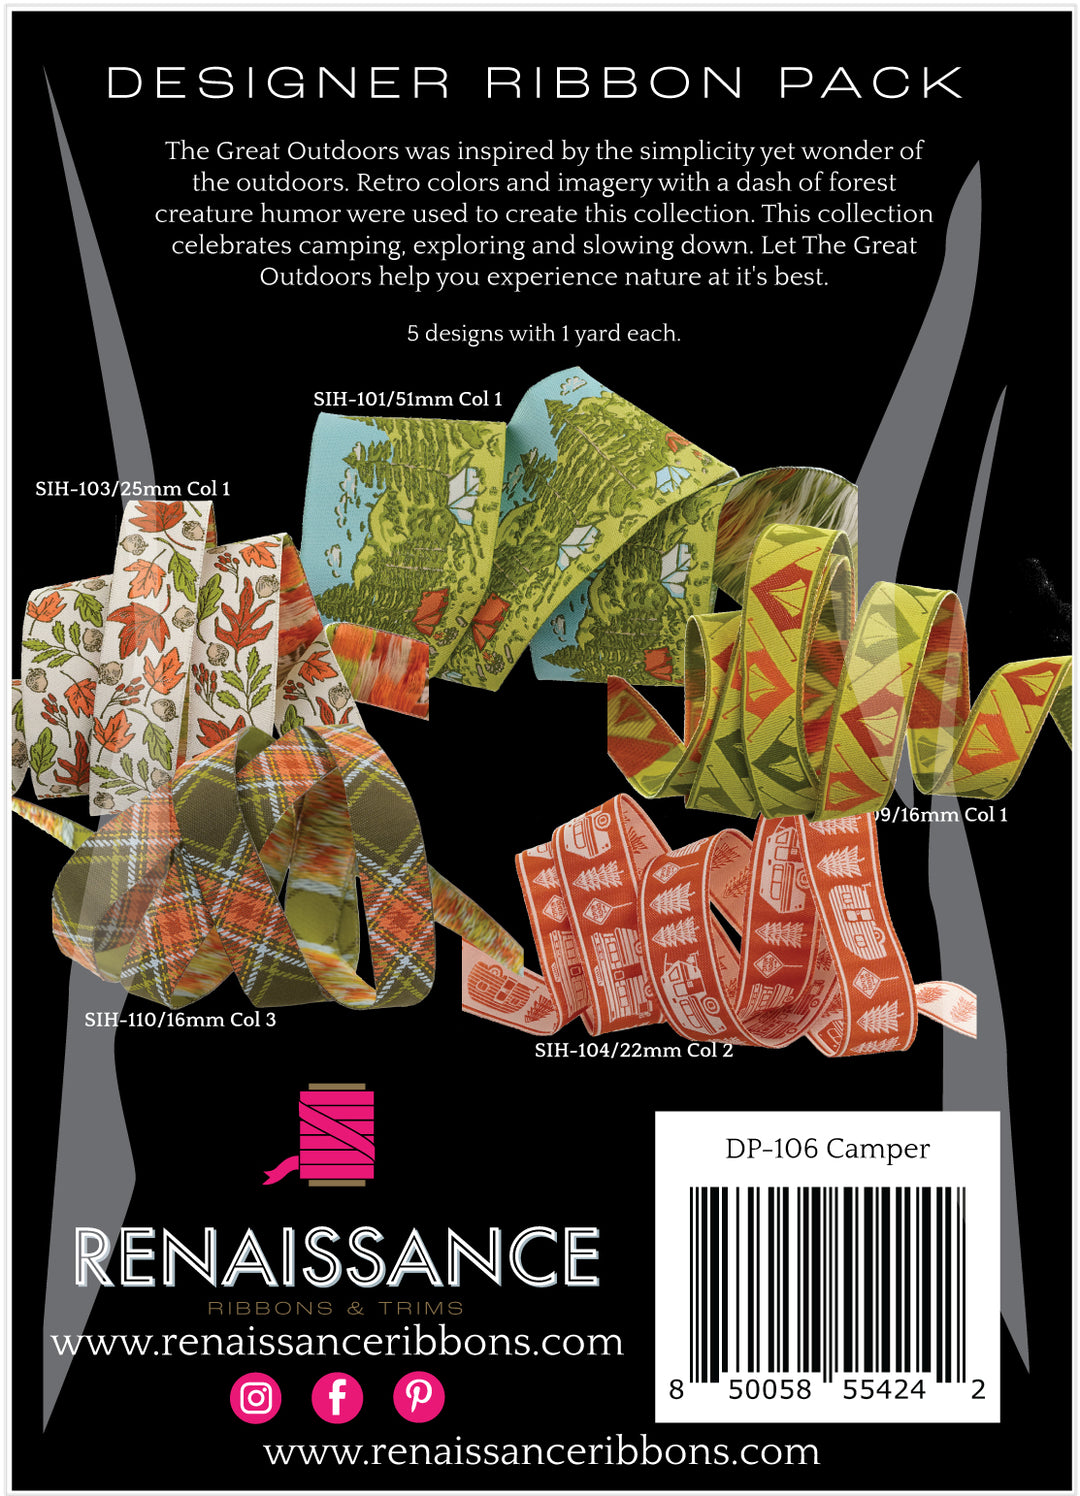 Renaissance Ribbons - The Great Outdoors - Camper - Designer Pack